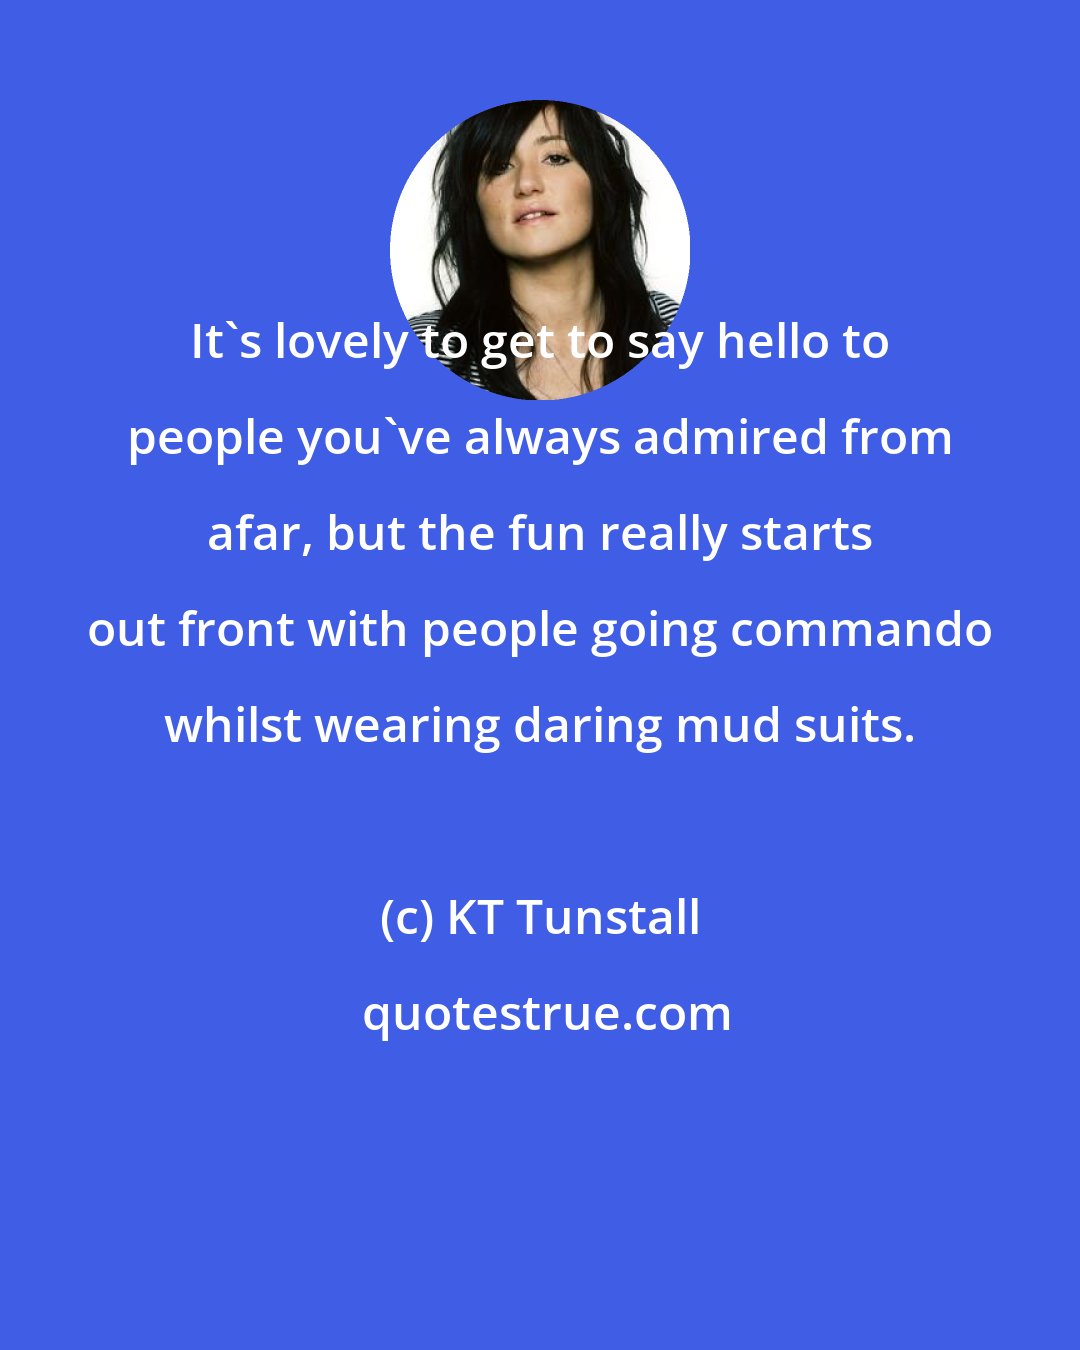 KT Tunstall: It's lovely to get to say hello to people you've always admired from afar, but the fun really starts out front with people going commando whilst wearing daring mud suits.